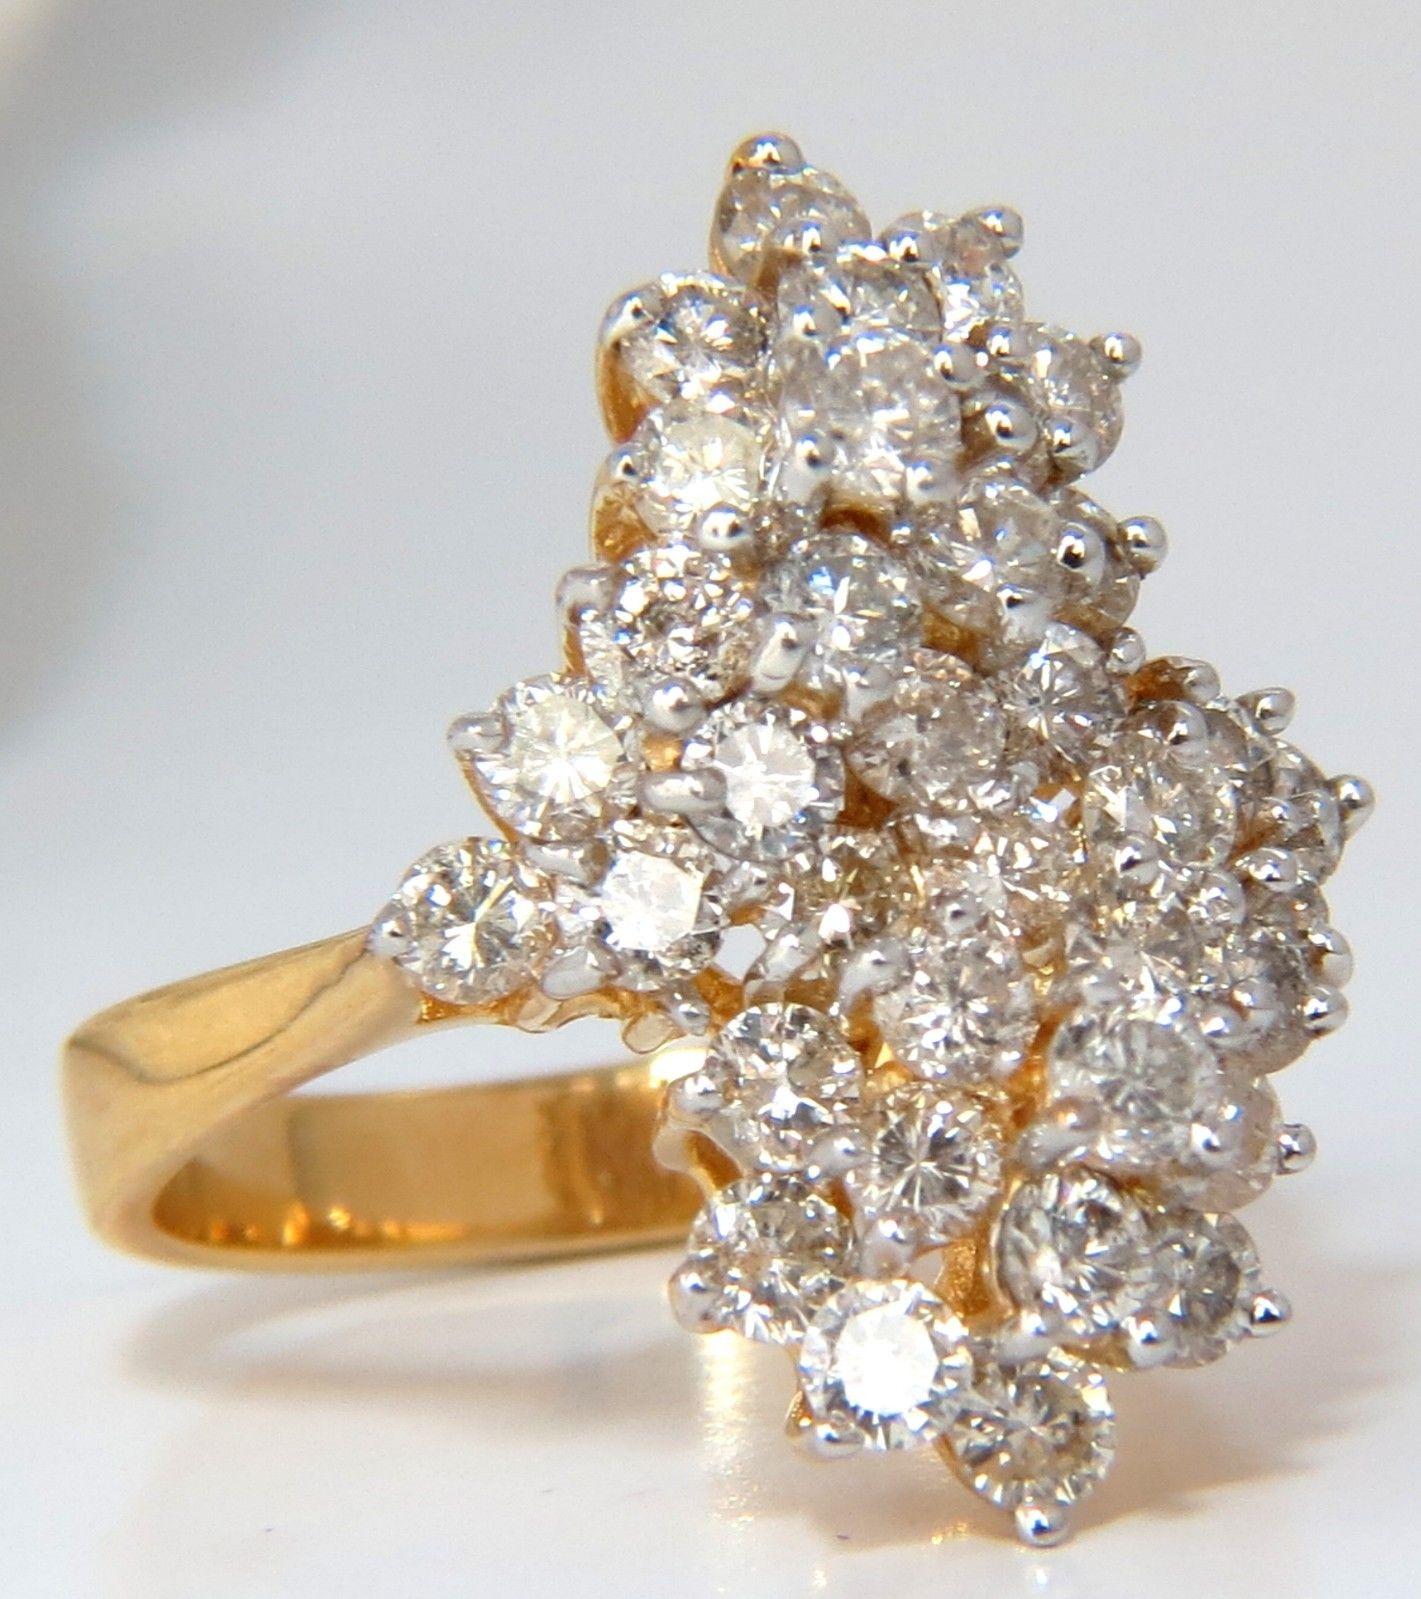 Double peak raised cocktail.

1.80cts Natural diamonds

 Rounds full cut Brilliant

I-color, Si-1  clarity.

14kt. yellow gold

5.5 grams.

current ring size: 

6.75

May be resized, please inquire. 

Deck of ring: .80 X .60 inch

$5,000 Appraisal